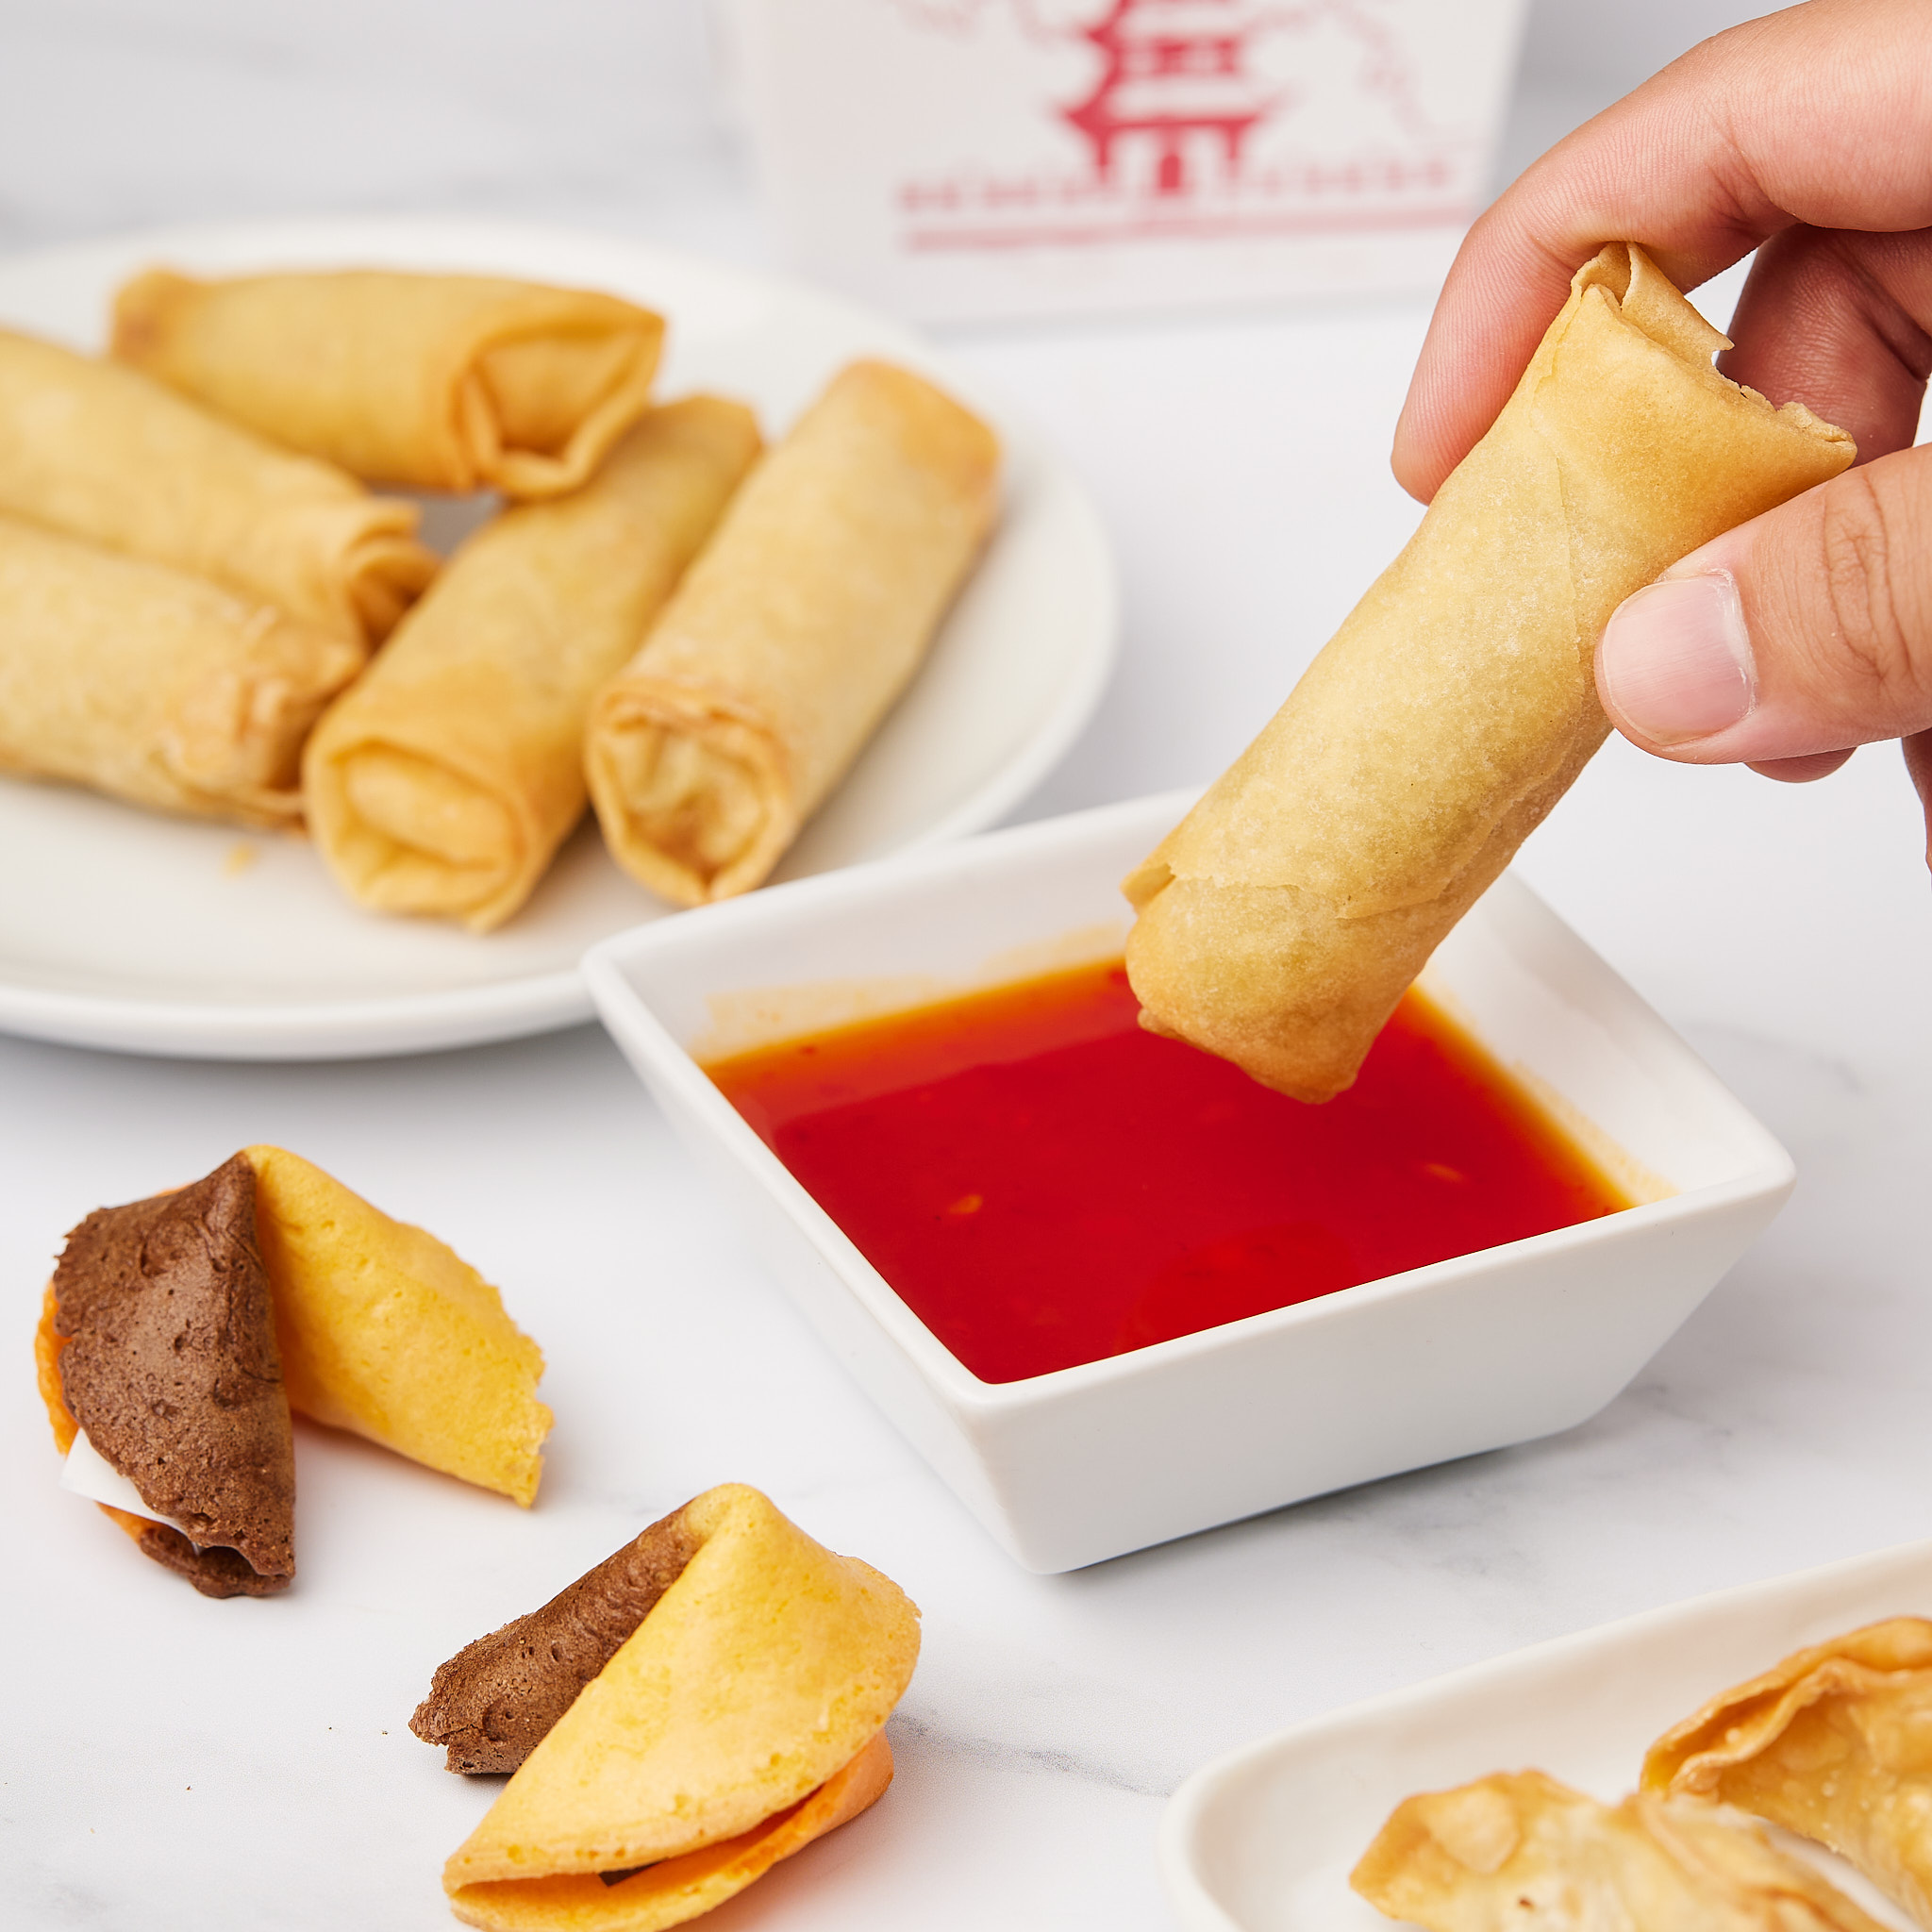 Veggie Spring Rolls Tso Chinese Takeout & Delivery Austin (512)355-1573